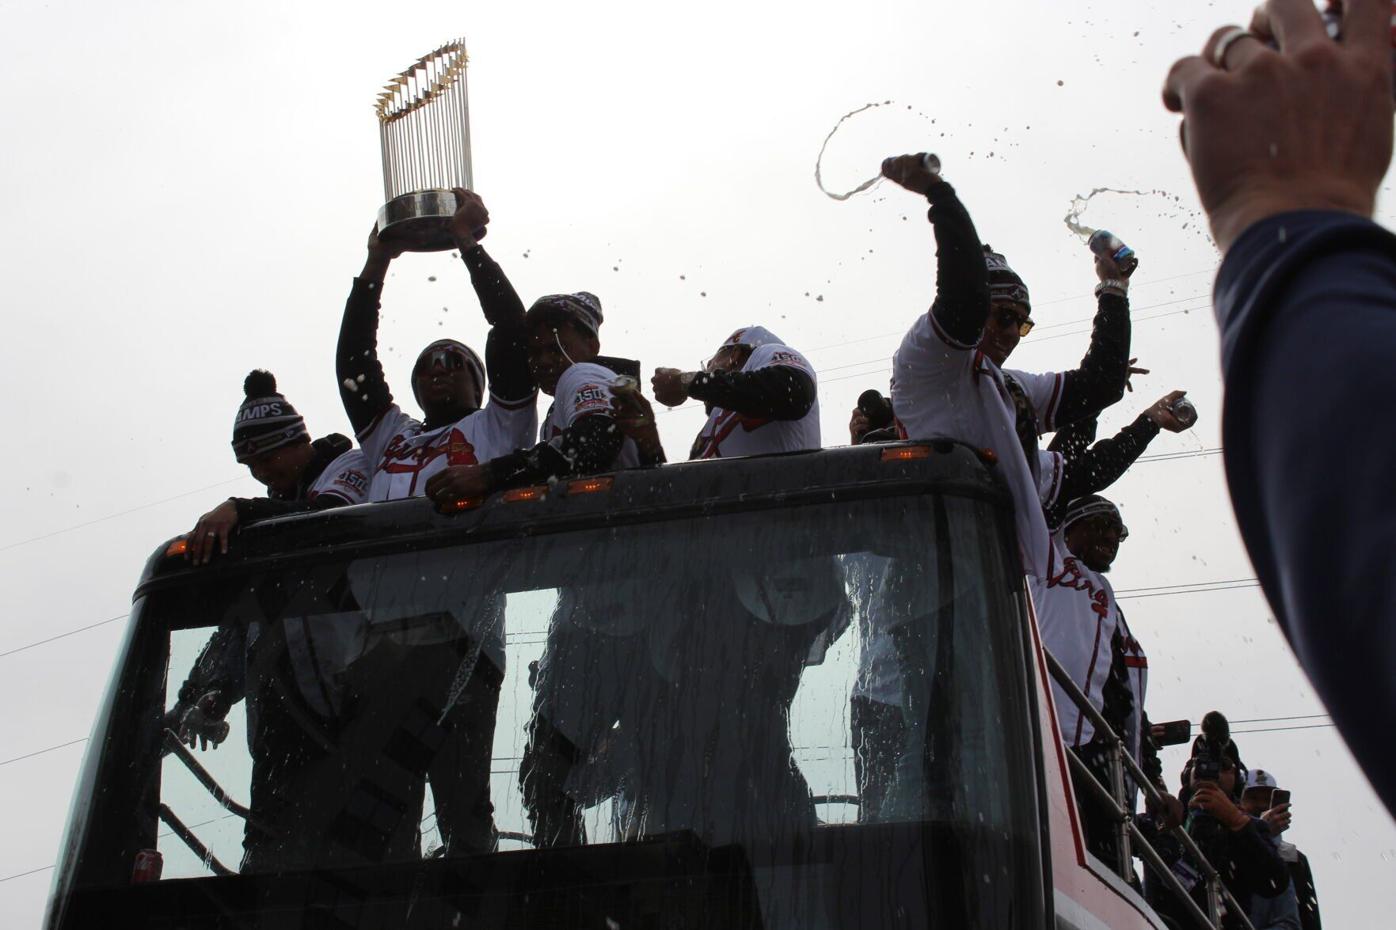 Braves World Series Trophy coming to Savannah for St. Patrick's